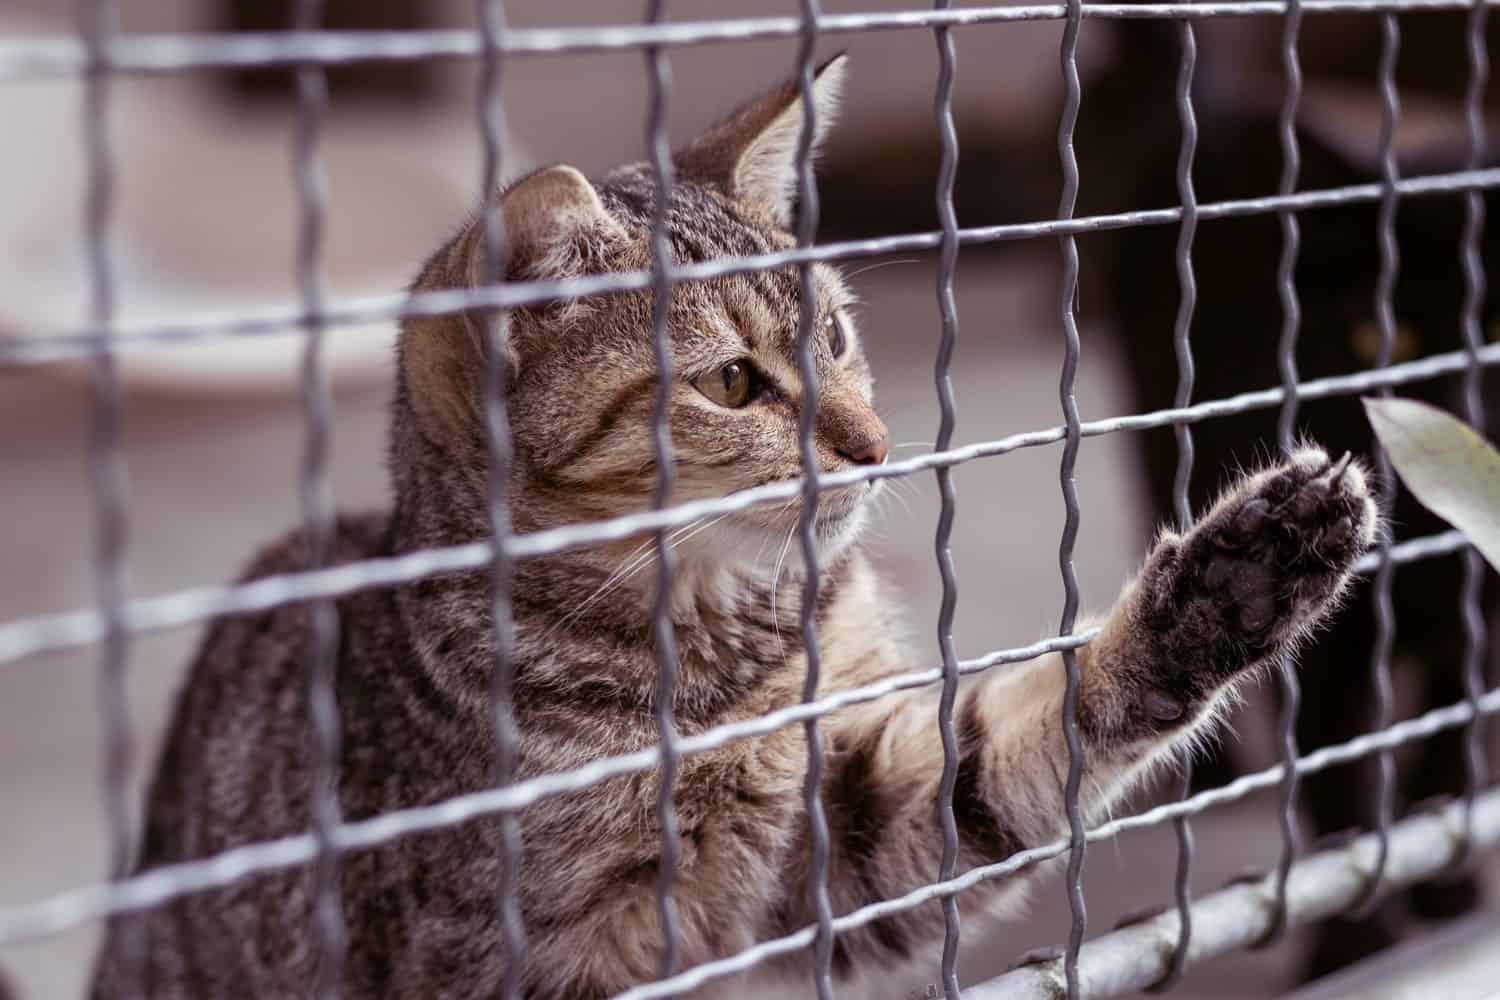 Abandoned cat behind the fence in animal shelter. Pet adoption. Playful tabby cat.
